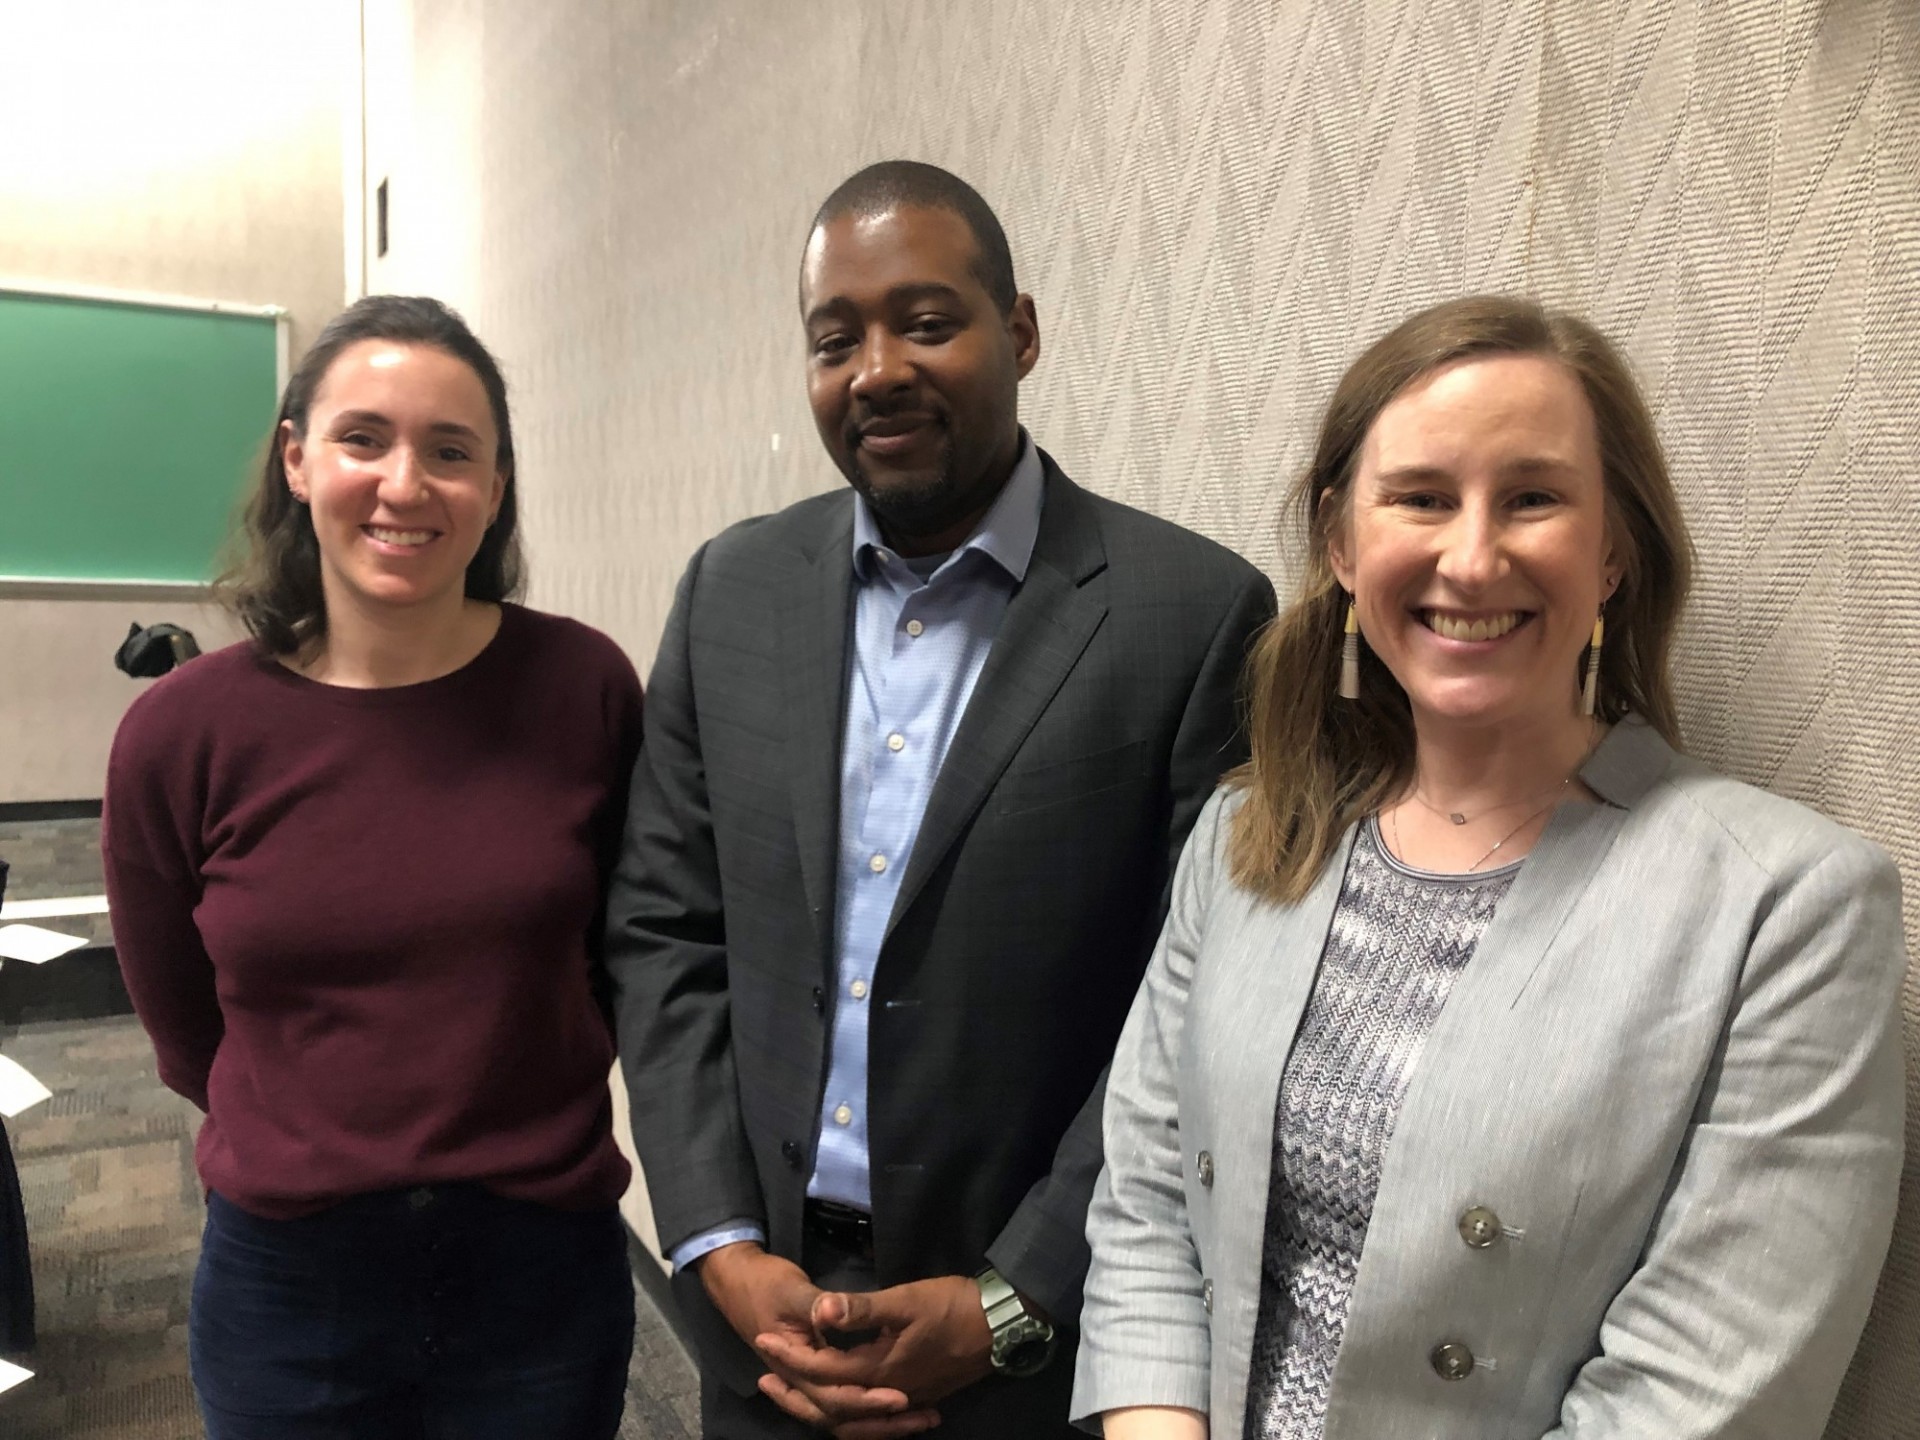 The Forum was spearheaded by CCNY graduate student Yael Amron (left), here with Lemard Mayes, Chief of Staff for NYS Assembly Member Inez Dickens, and Jessica Prata, Assistant Vice President of the Office of Sustainability at Columbia University.